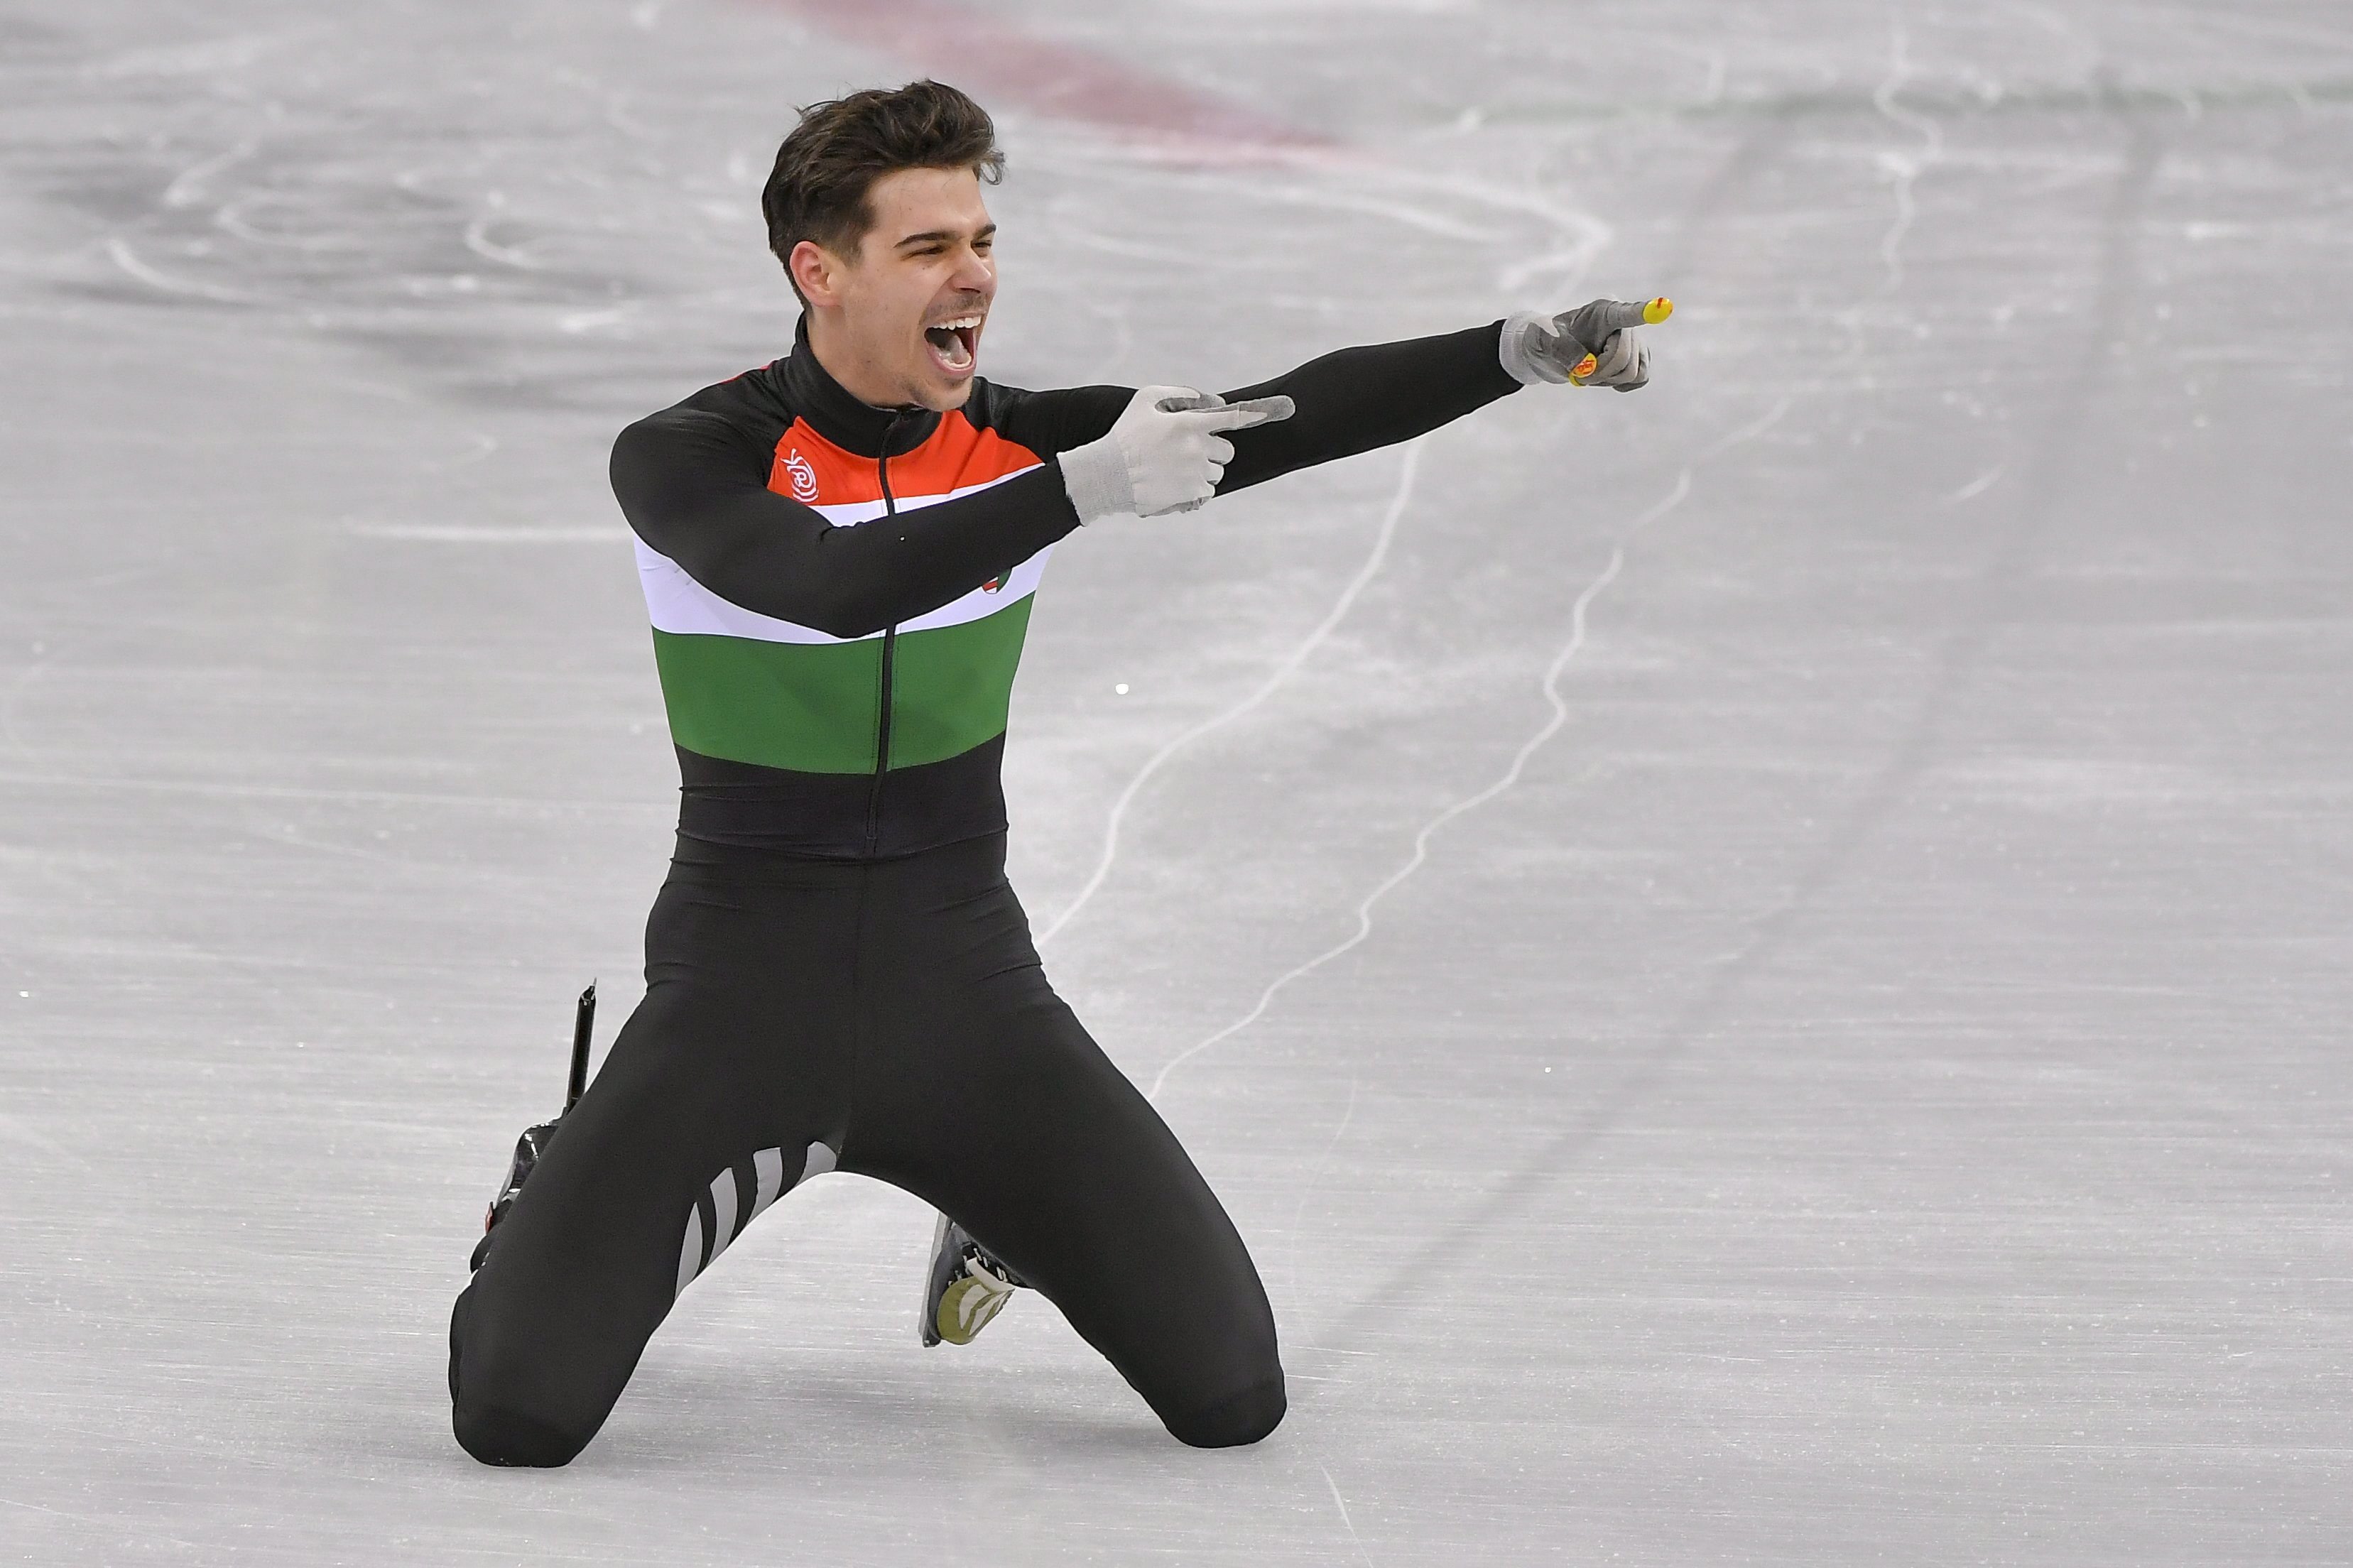 Hungary Wins First Ever Gold In Winter Olympics